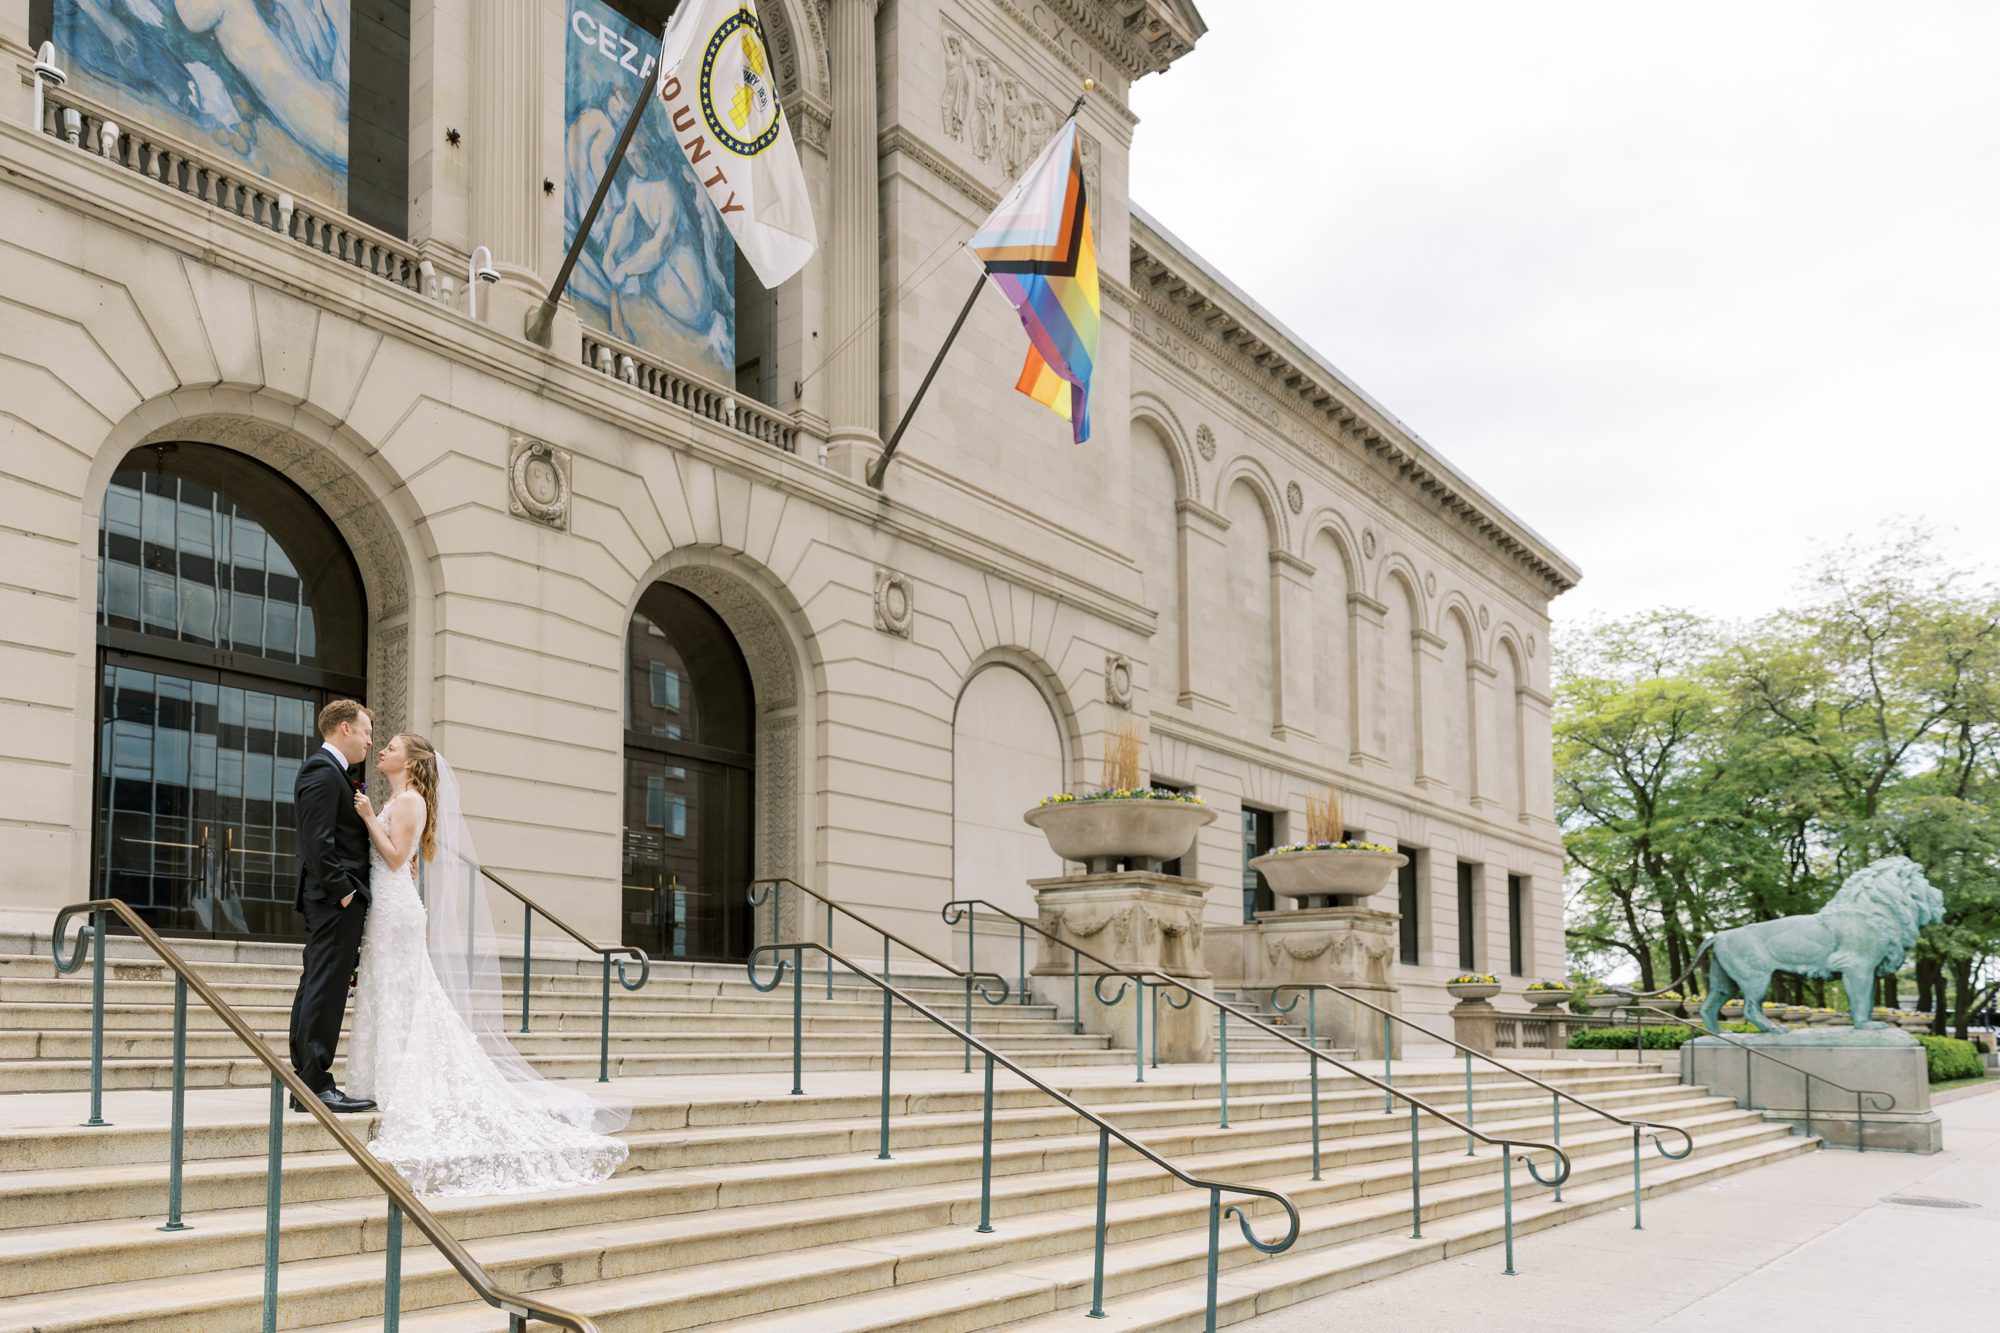 Bride and groom pose for wedding photos at Chicago Art Institute